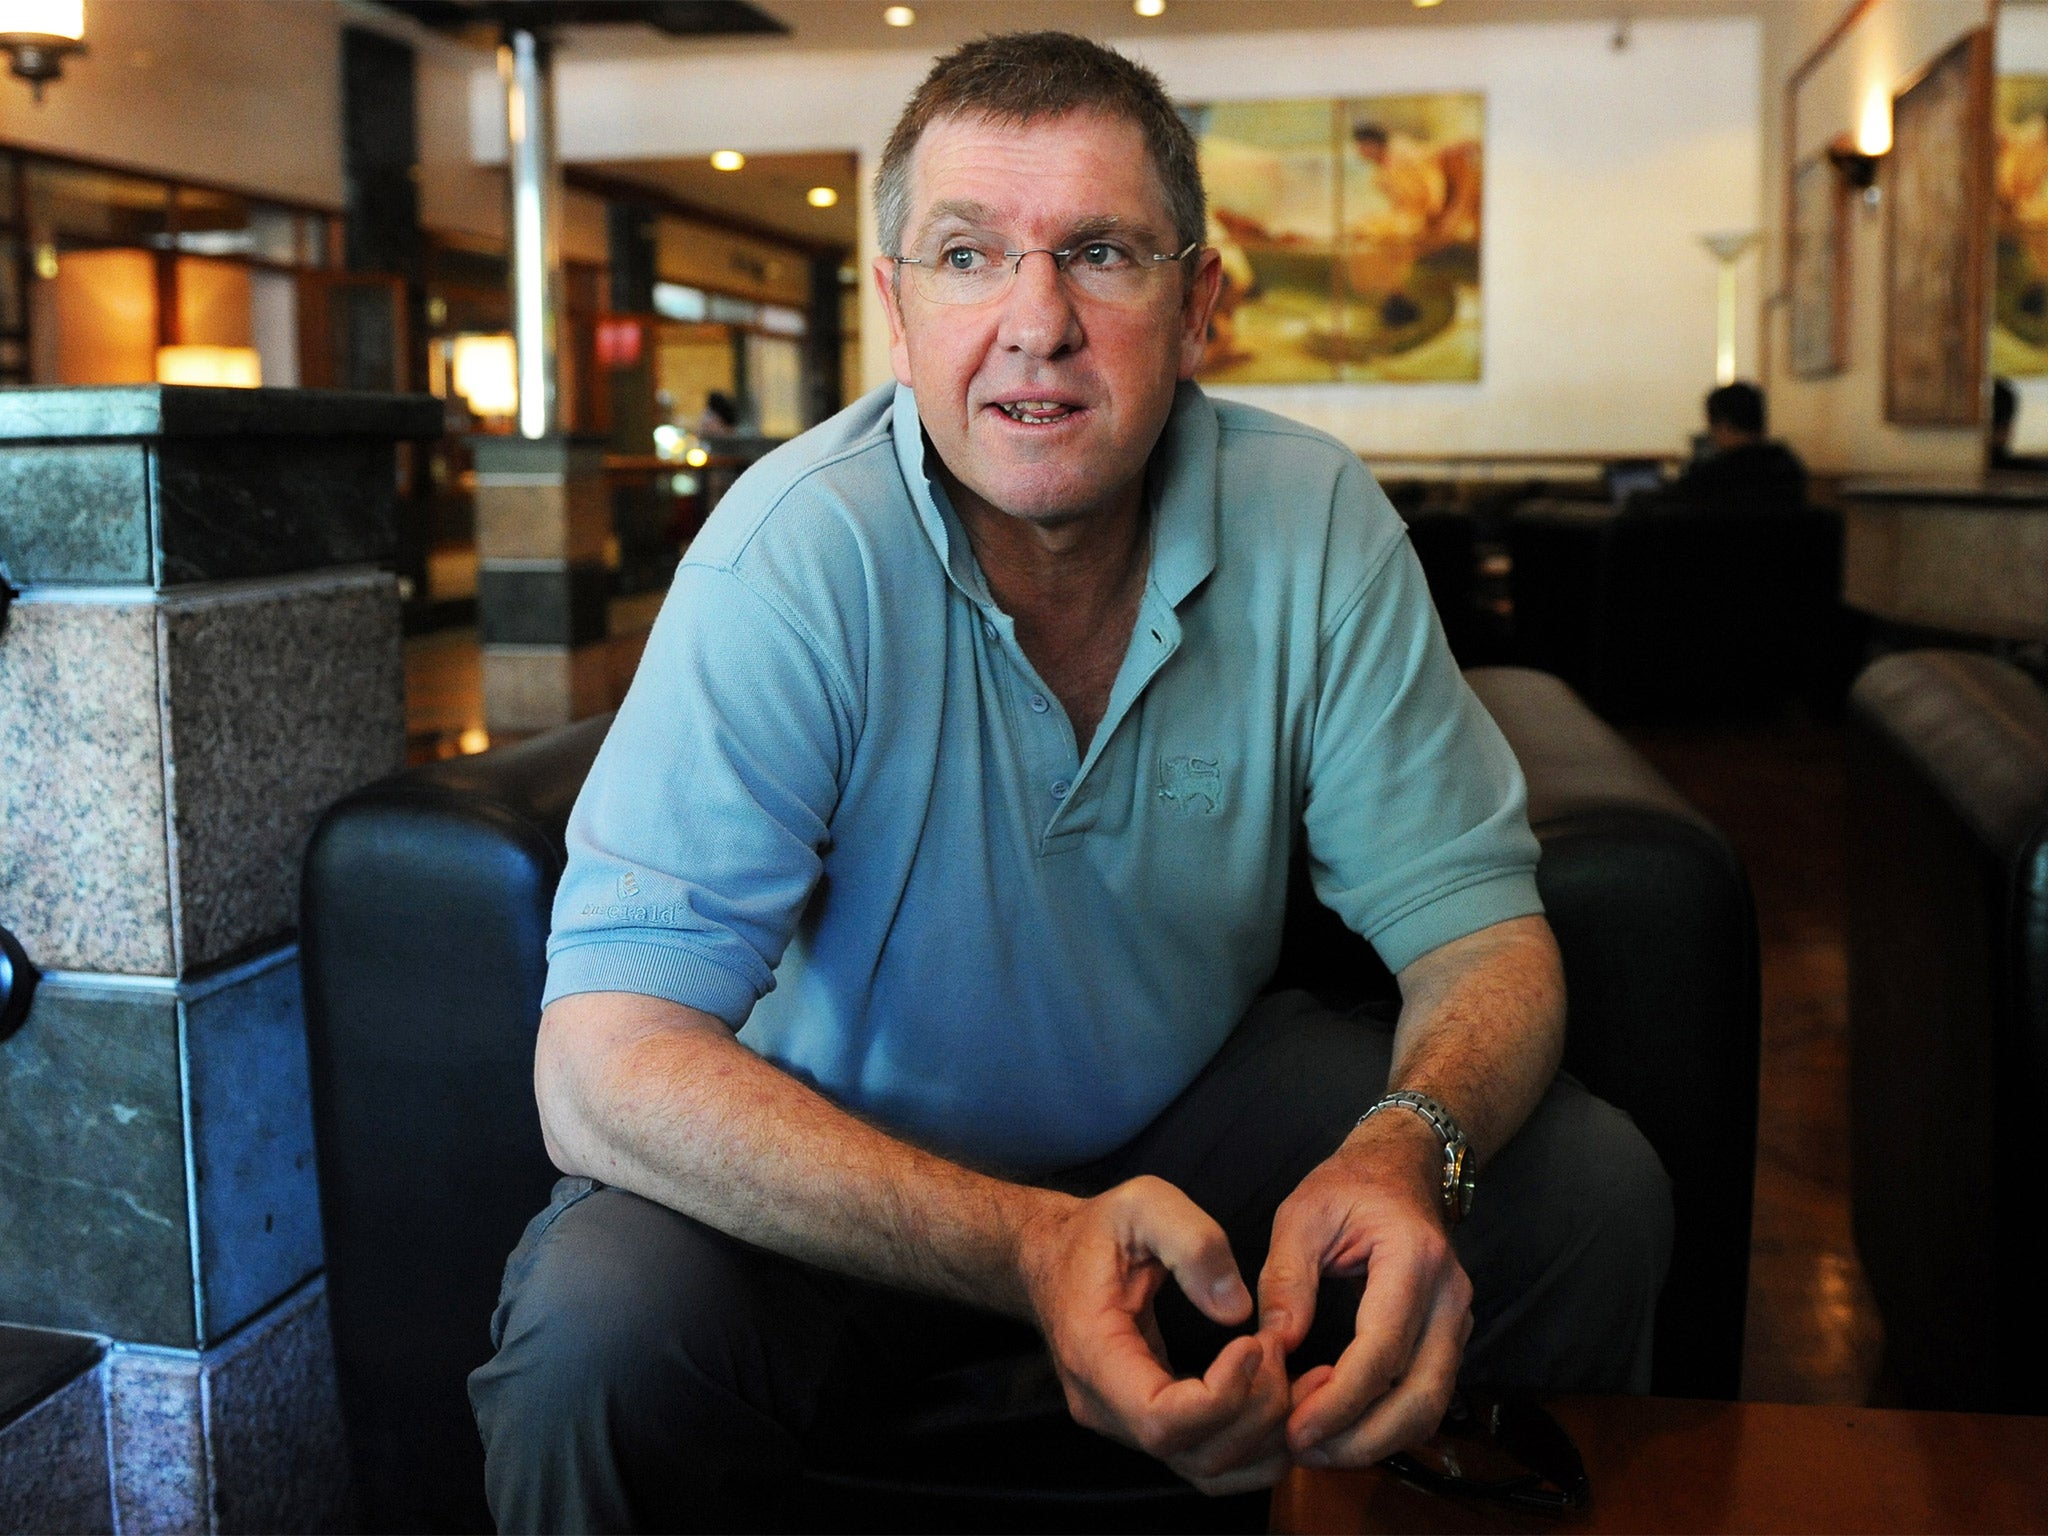 New coach Trevor Bayliss has been impressed by the enthusiasm and skill of England’s young players